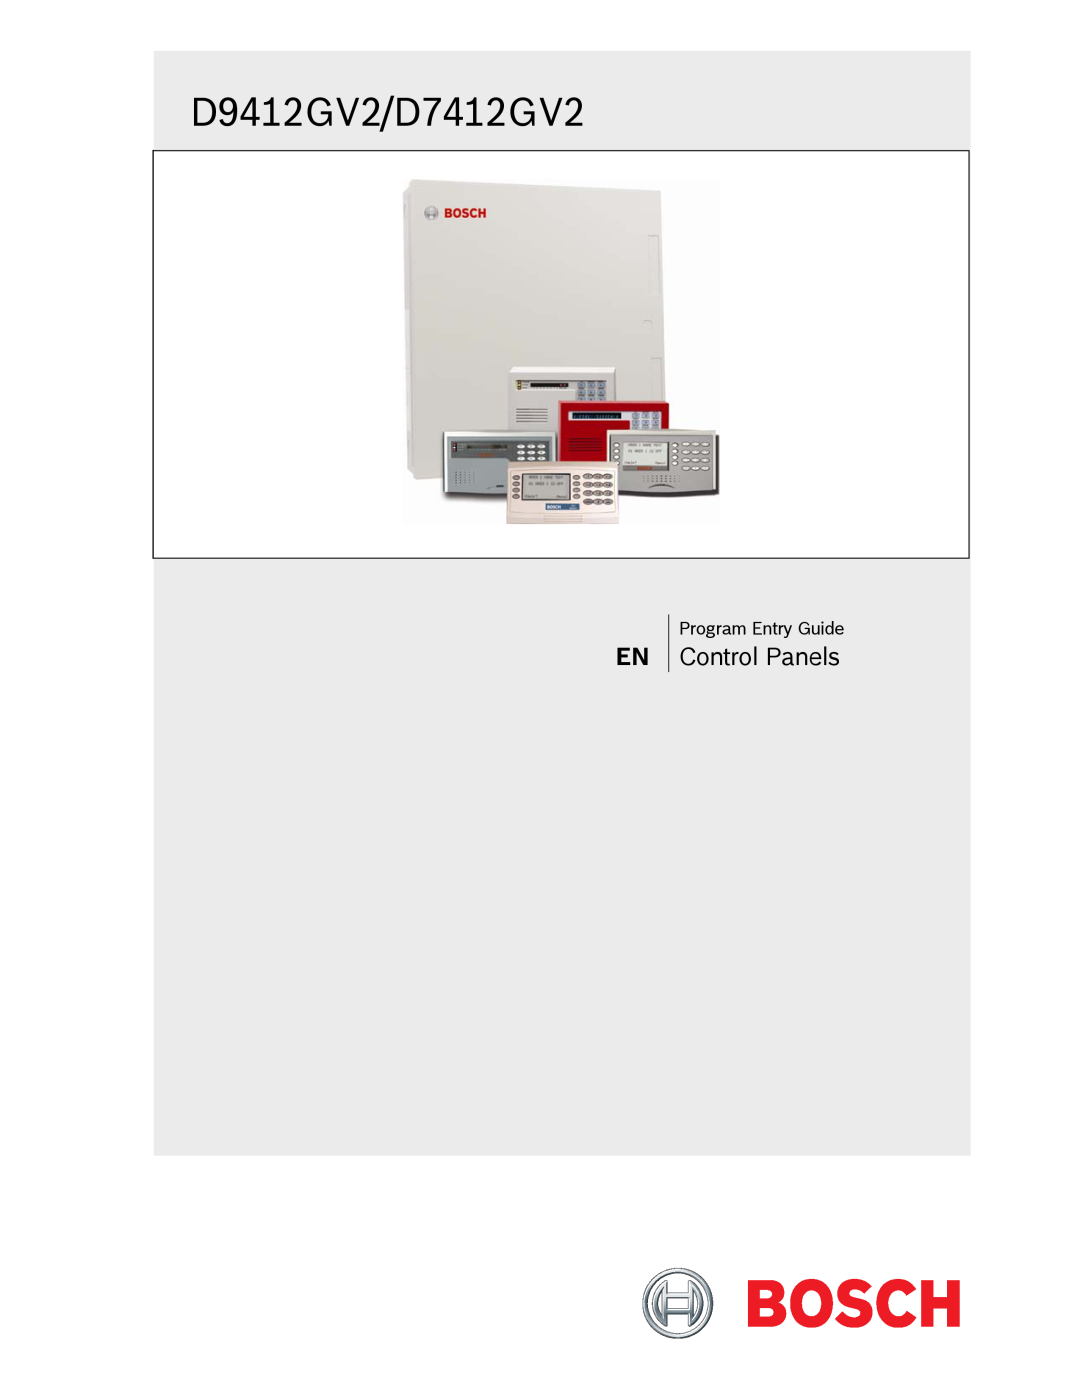 Bosch Appliances manual Operation and Installation Guide, D9412GV2/D7412GV2, Control Panels 